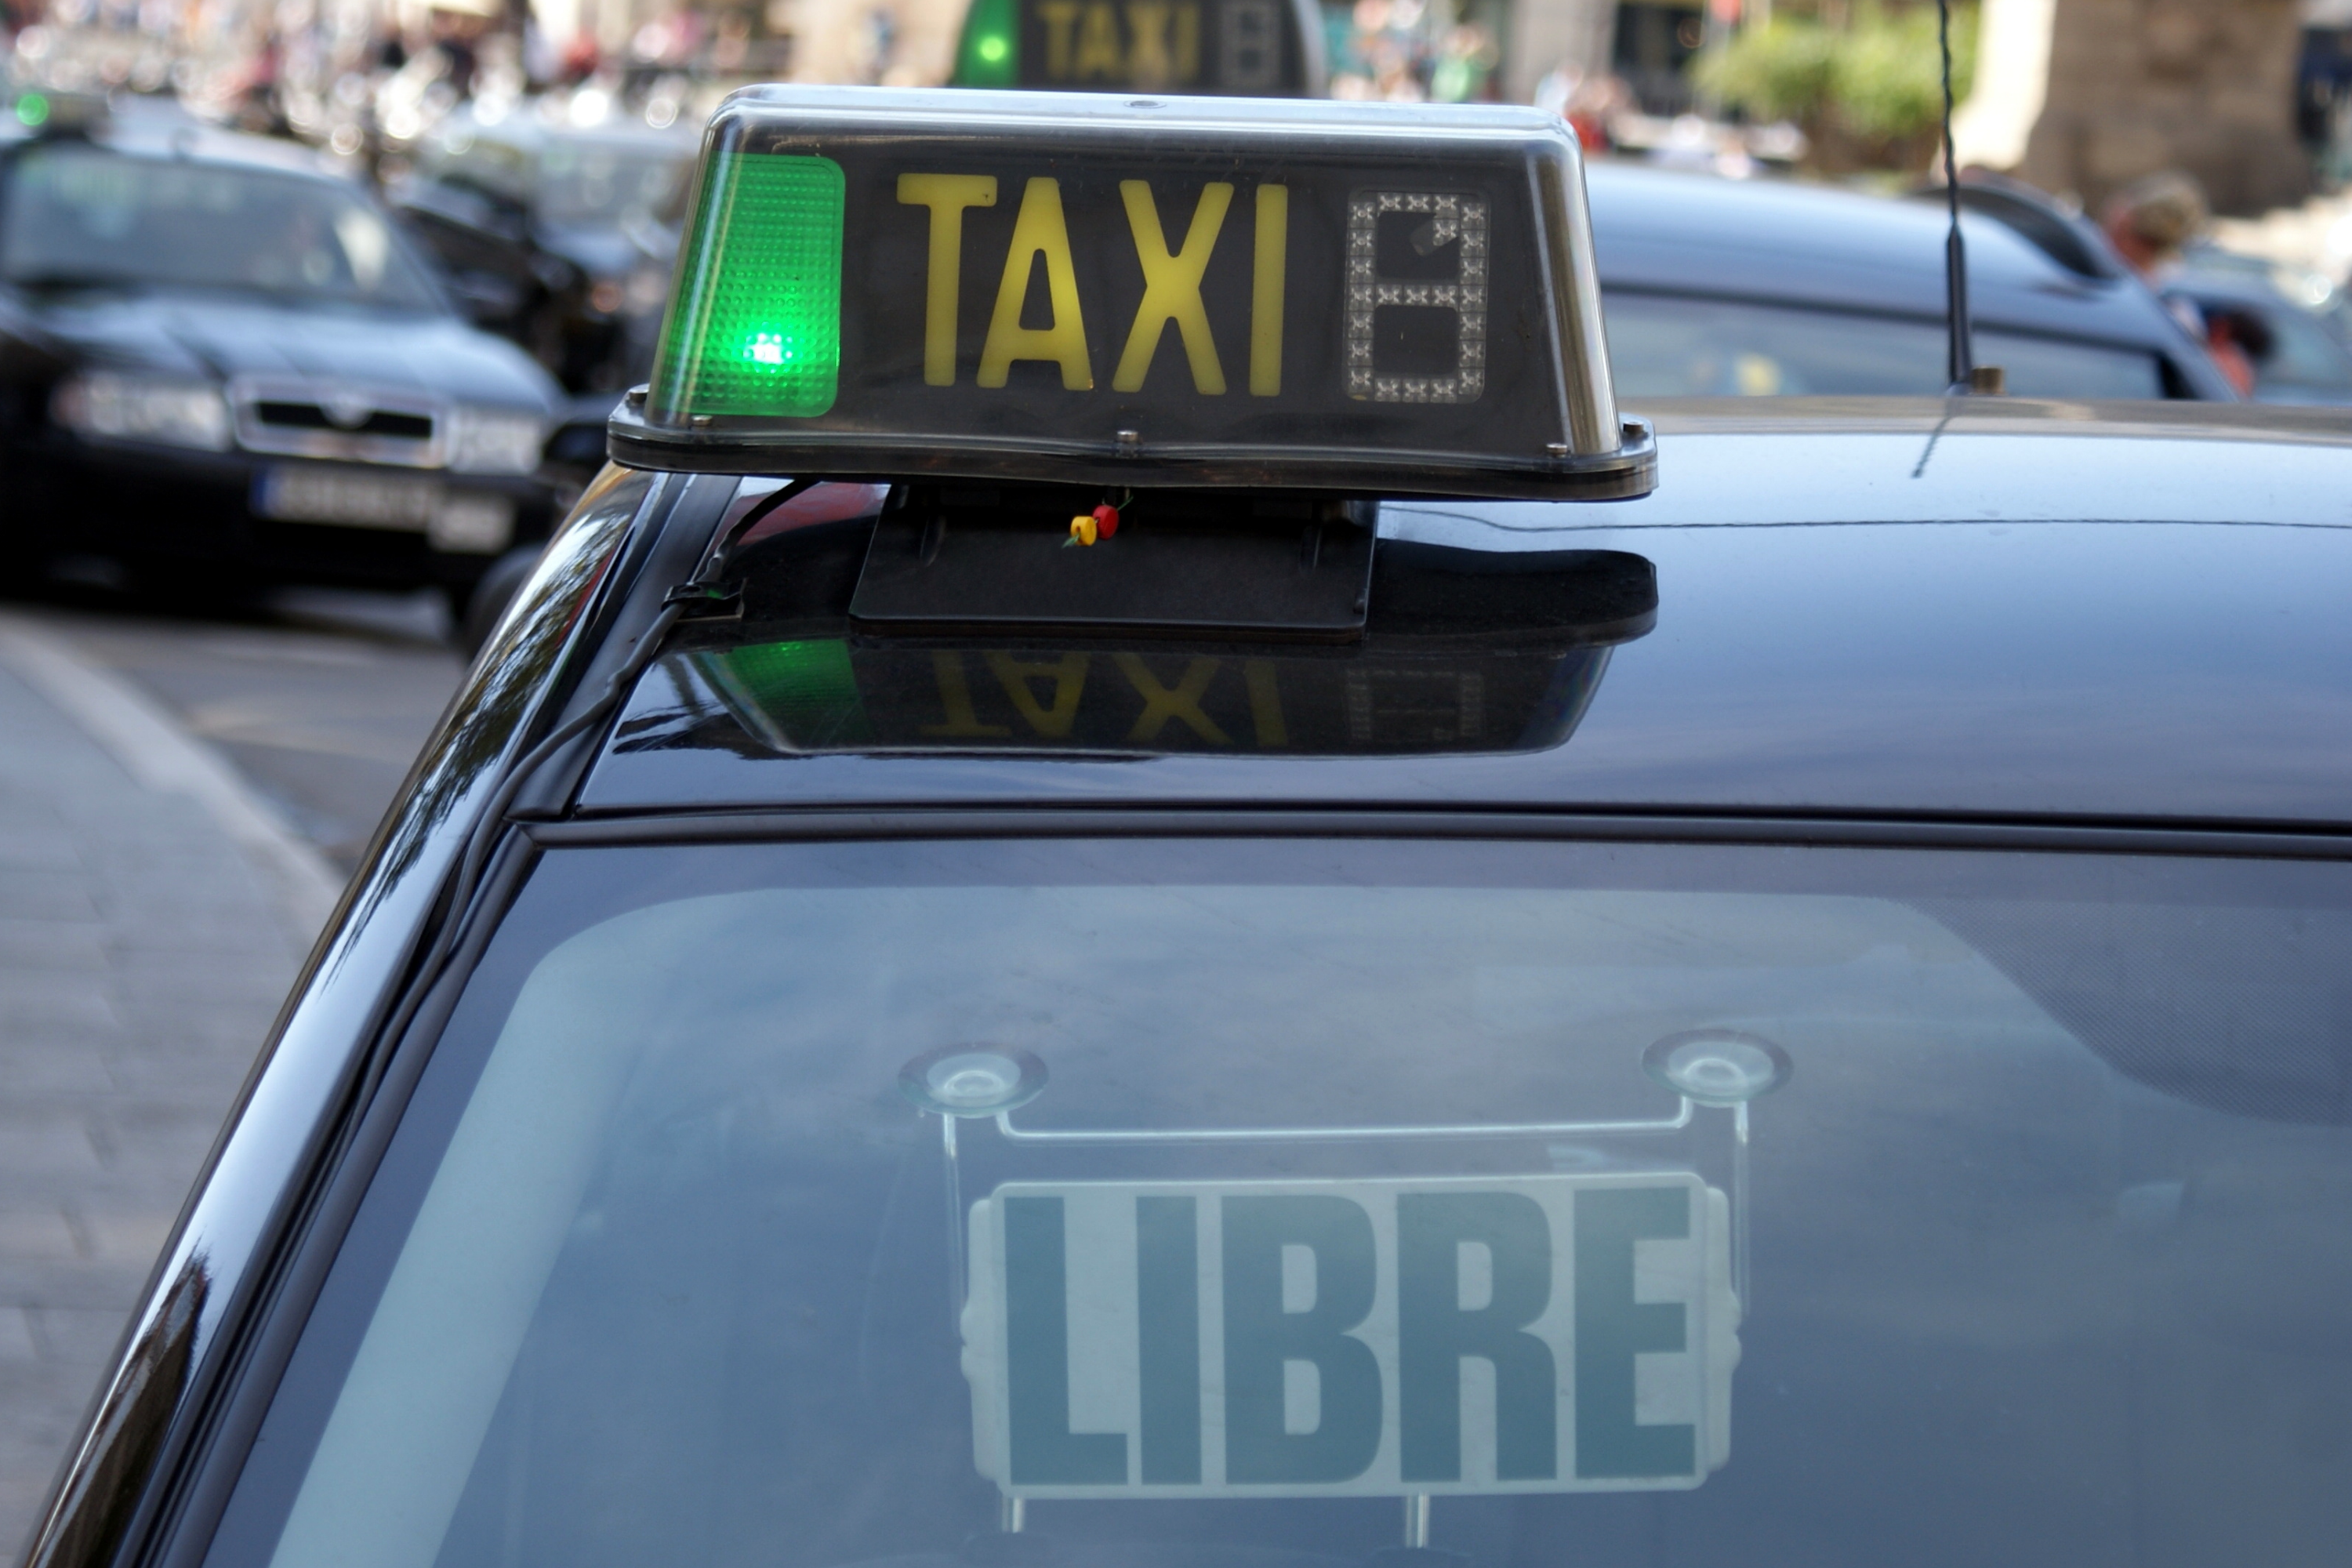 taxis in barcelona litre green light